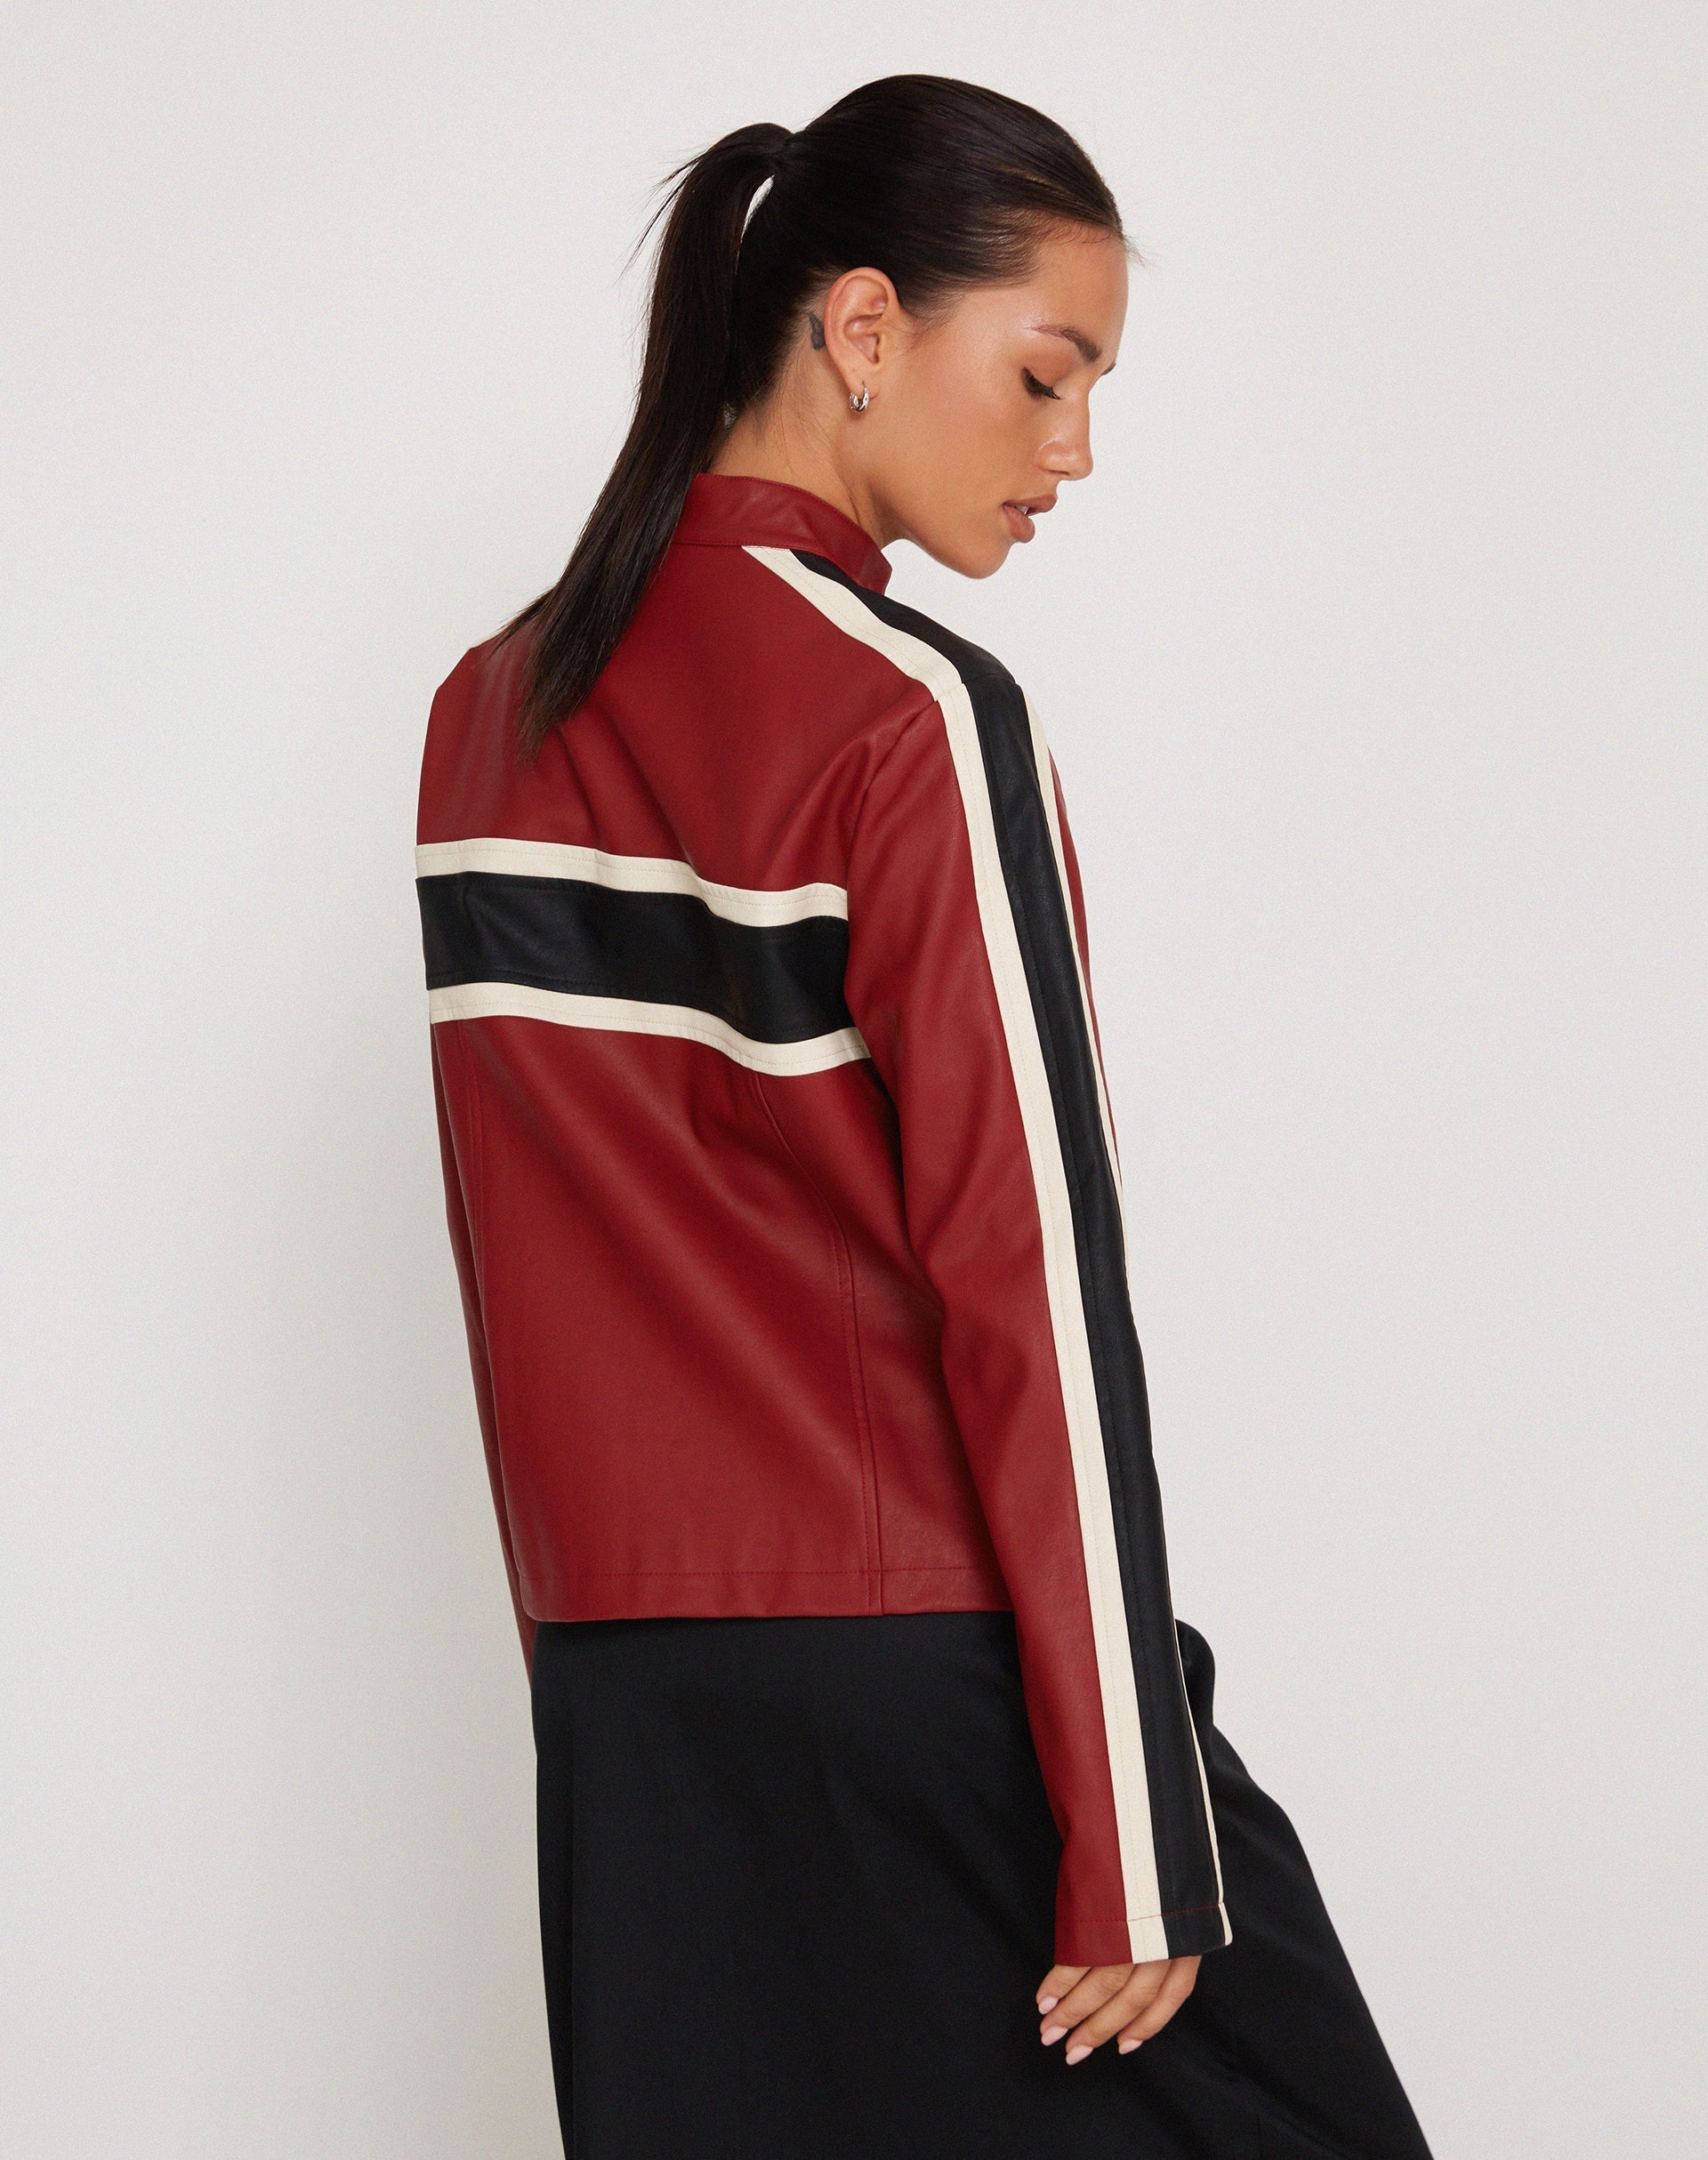 Image of Oliver Zip Up Jacket in PU Red with Ecru Stripe